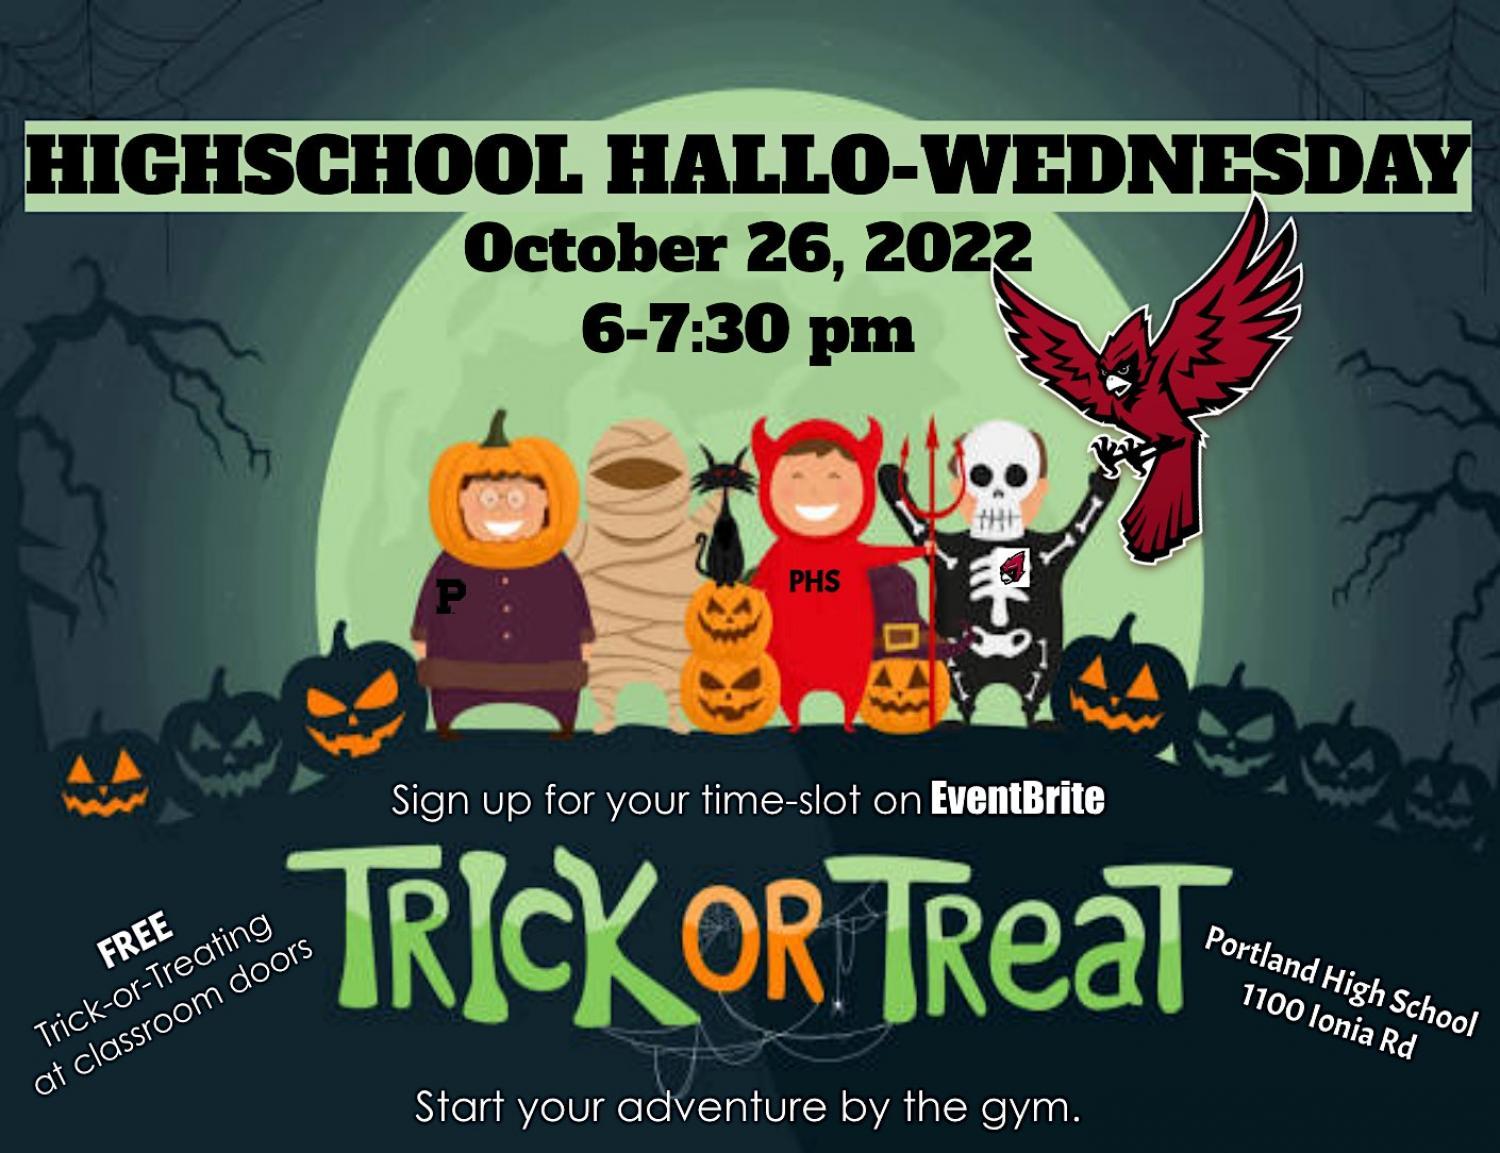 Portland High School - Halloween Trick or Treating
Wed Oct 26, 6:00 PM - Wed Oct 26, 7:30 PM
in 7 days